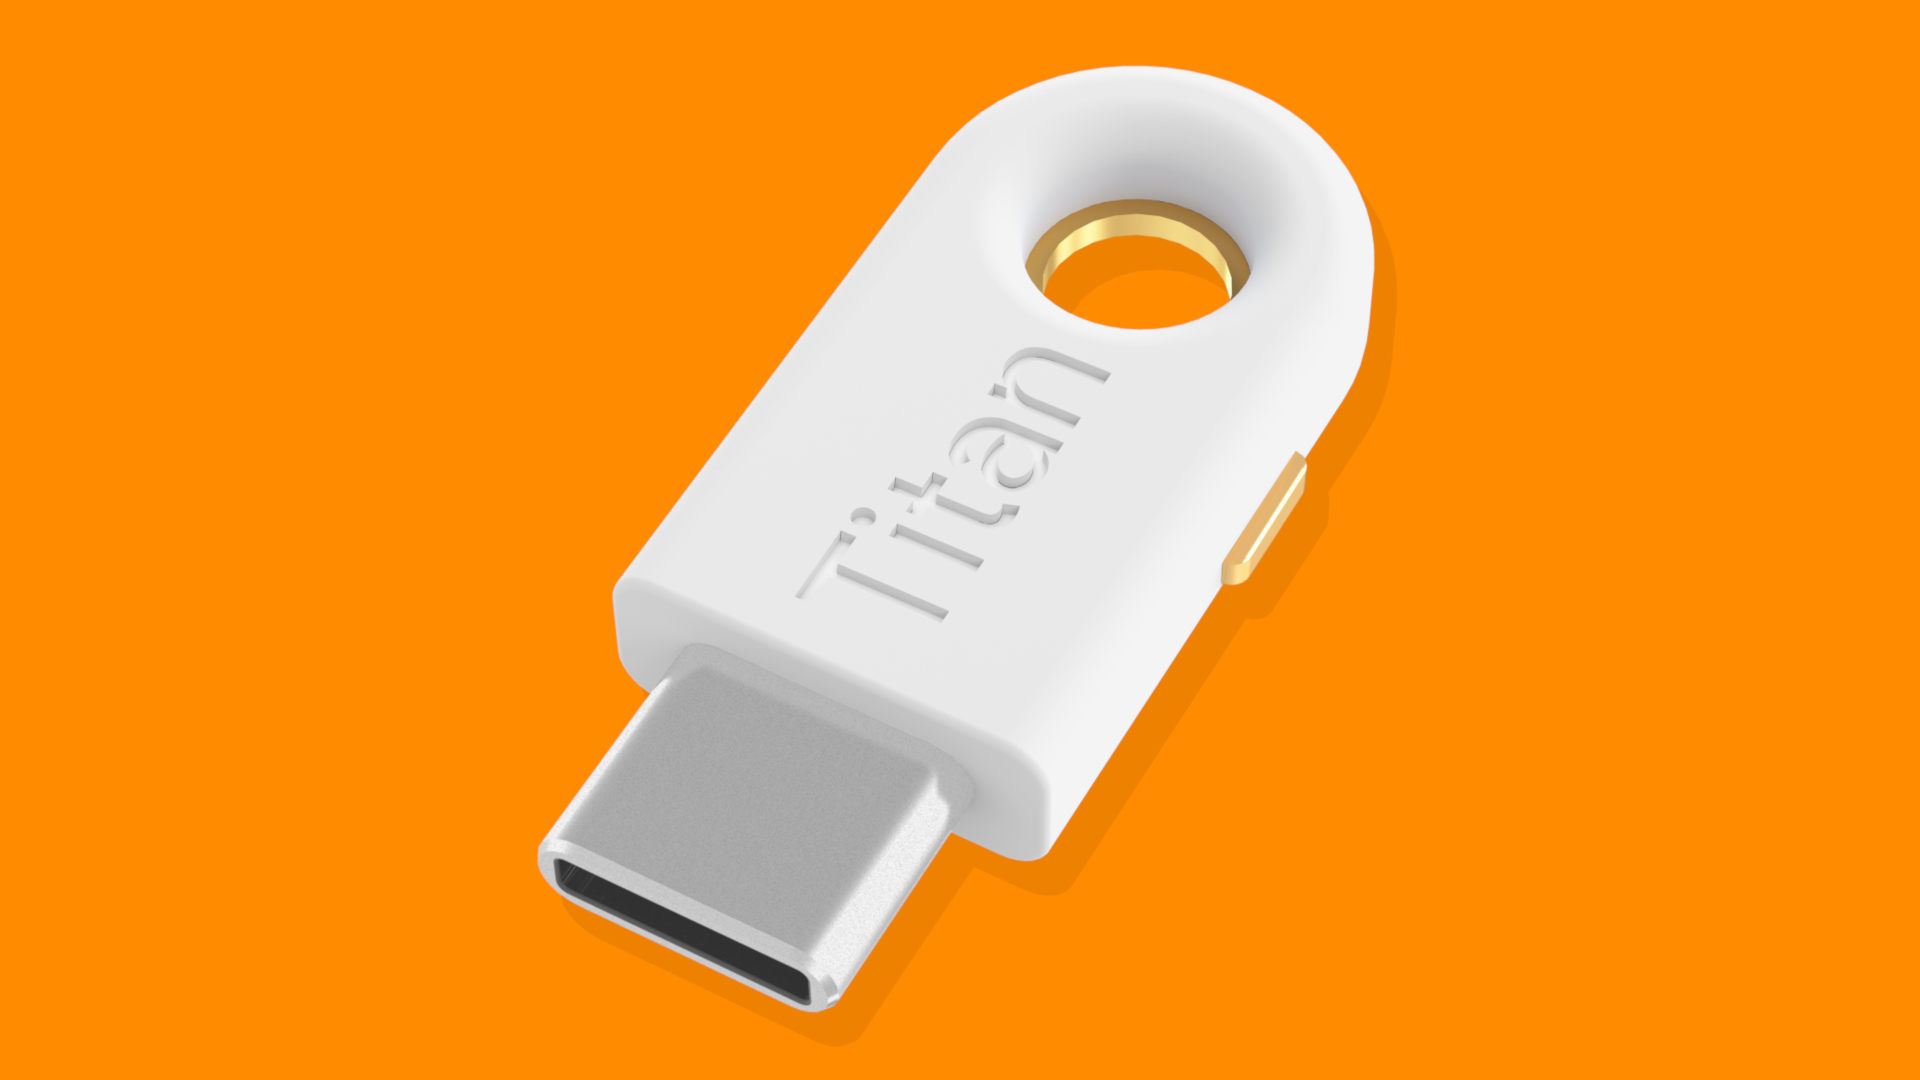 Now available] Titan security key updated with USB-C